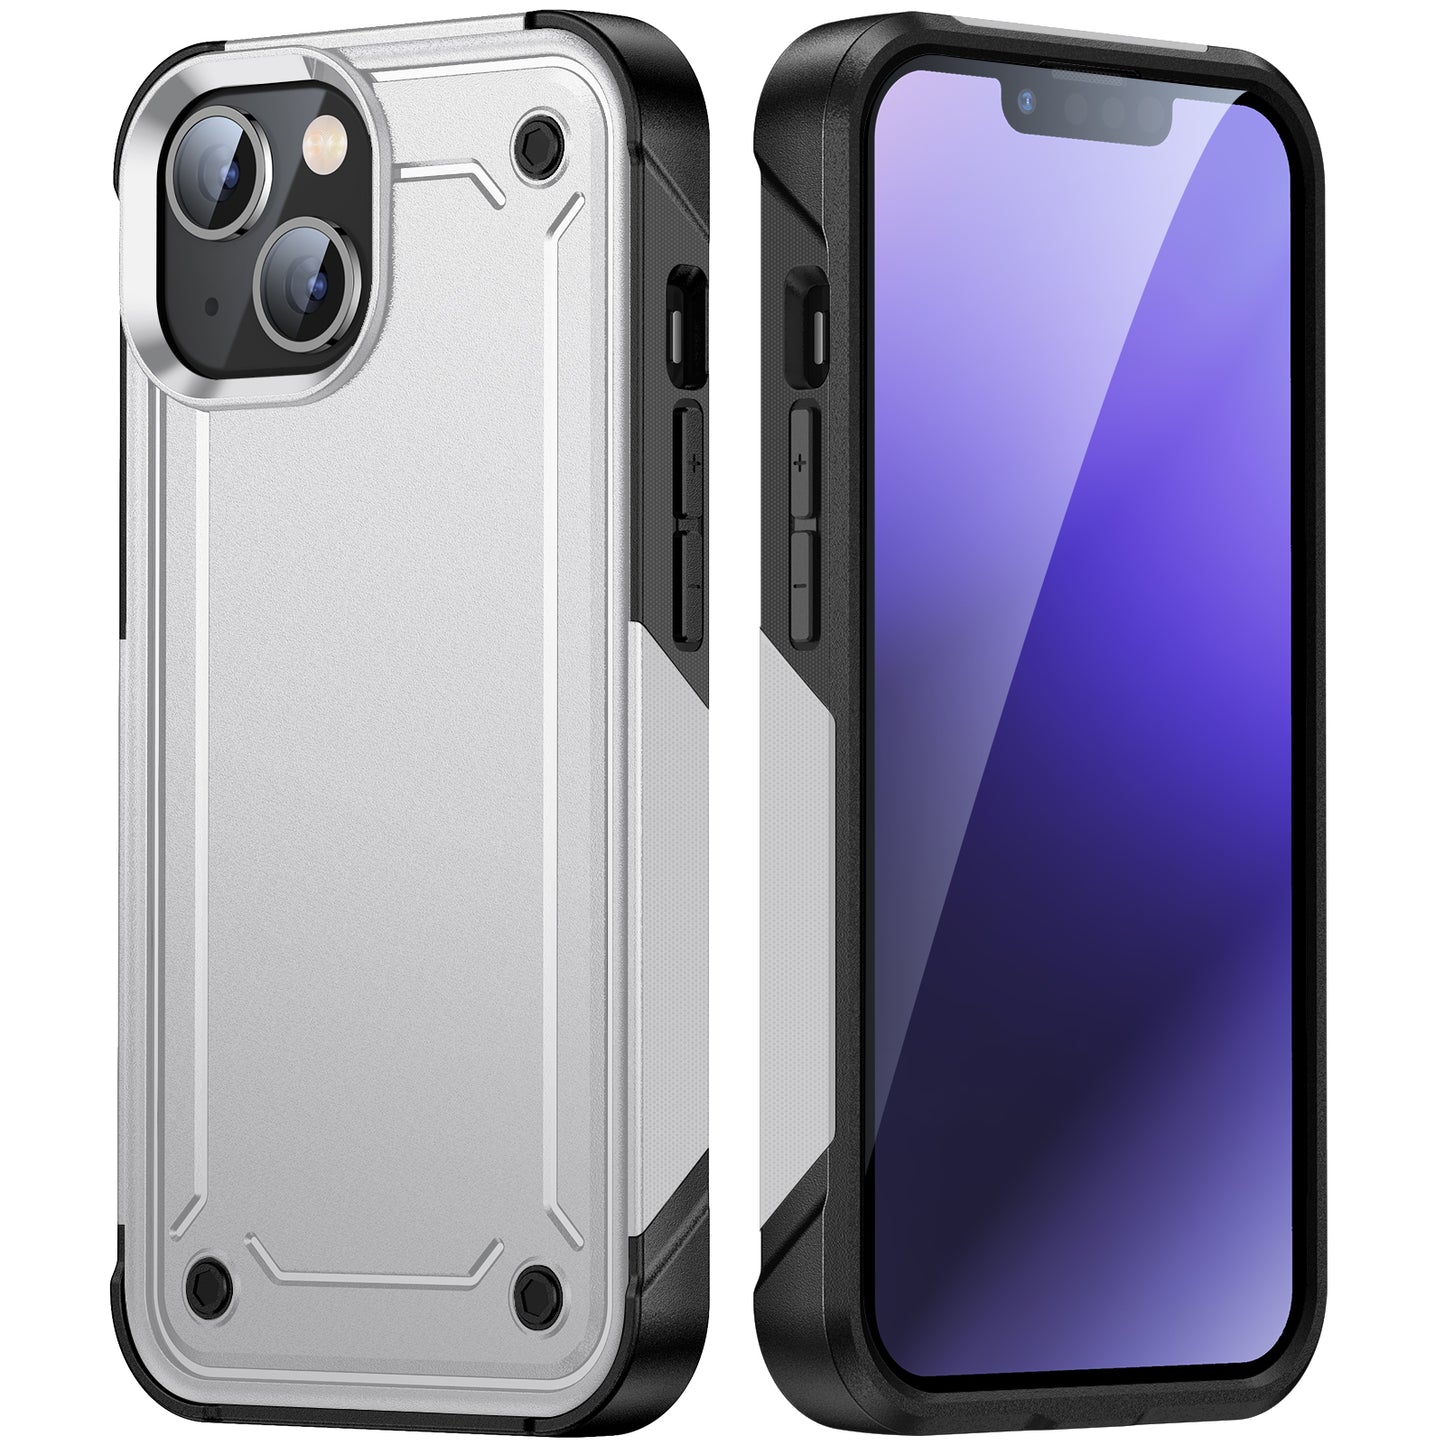 new shockproof armor hybrid soft tpu hard pc 2 in 1 mobile phone case for iphone 11 pro max